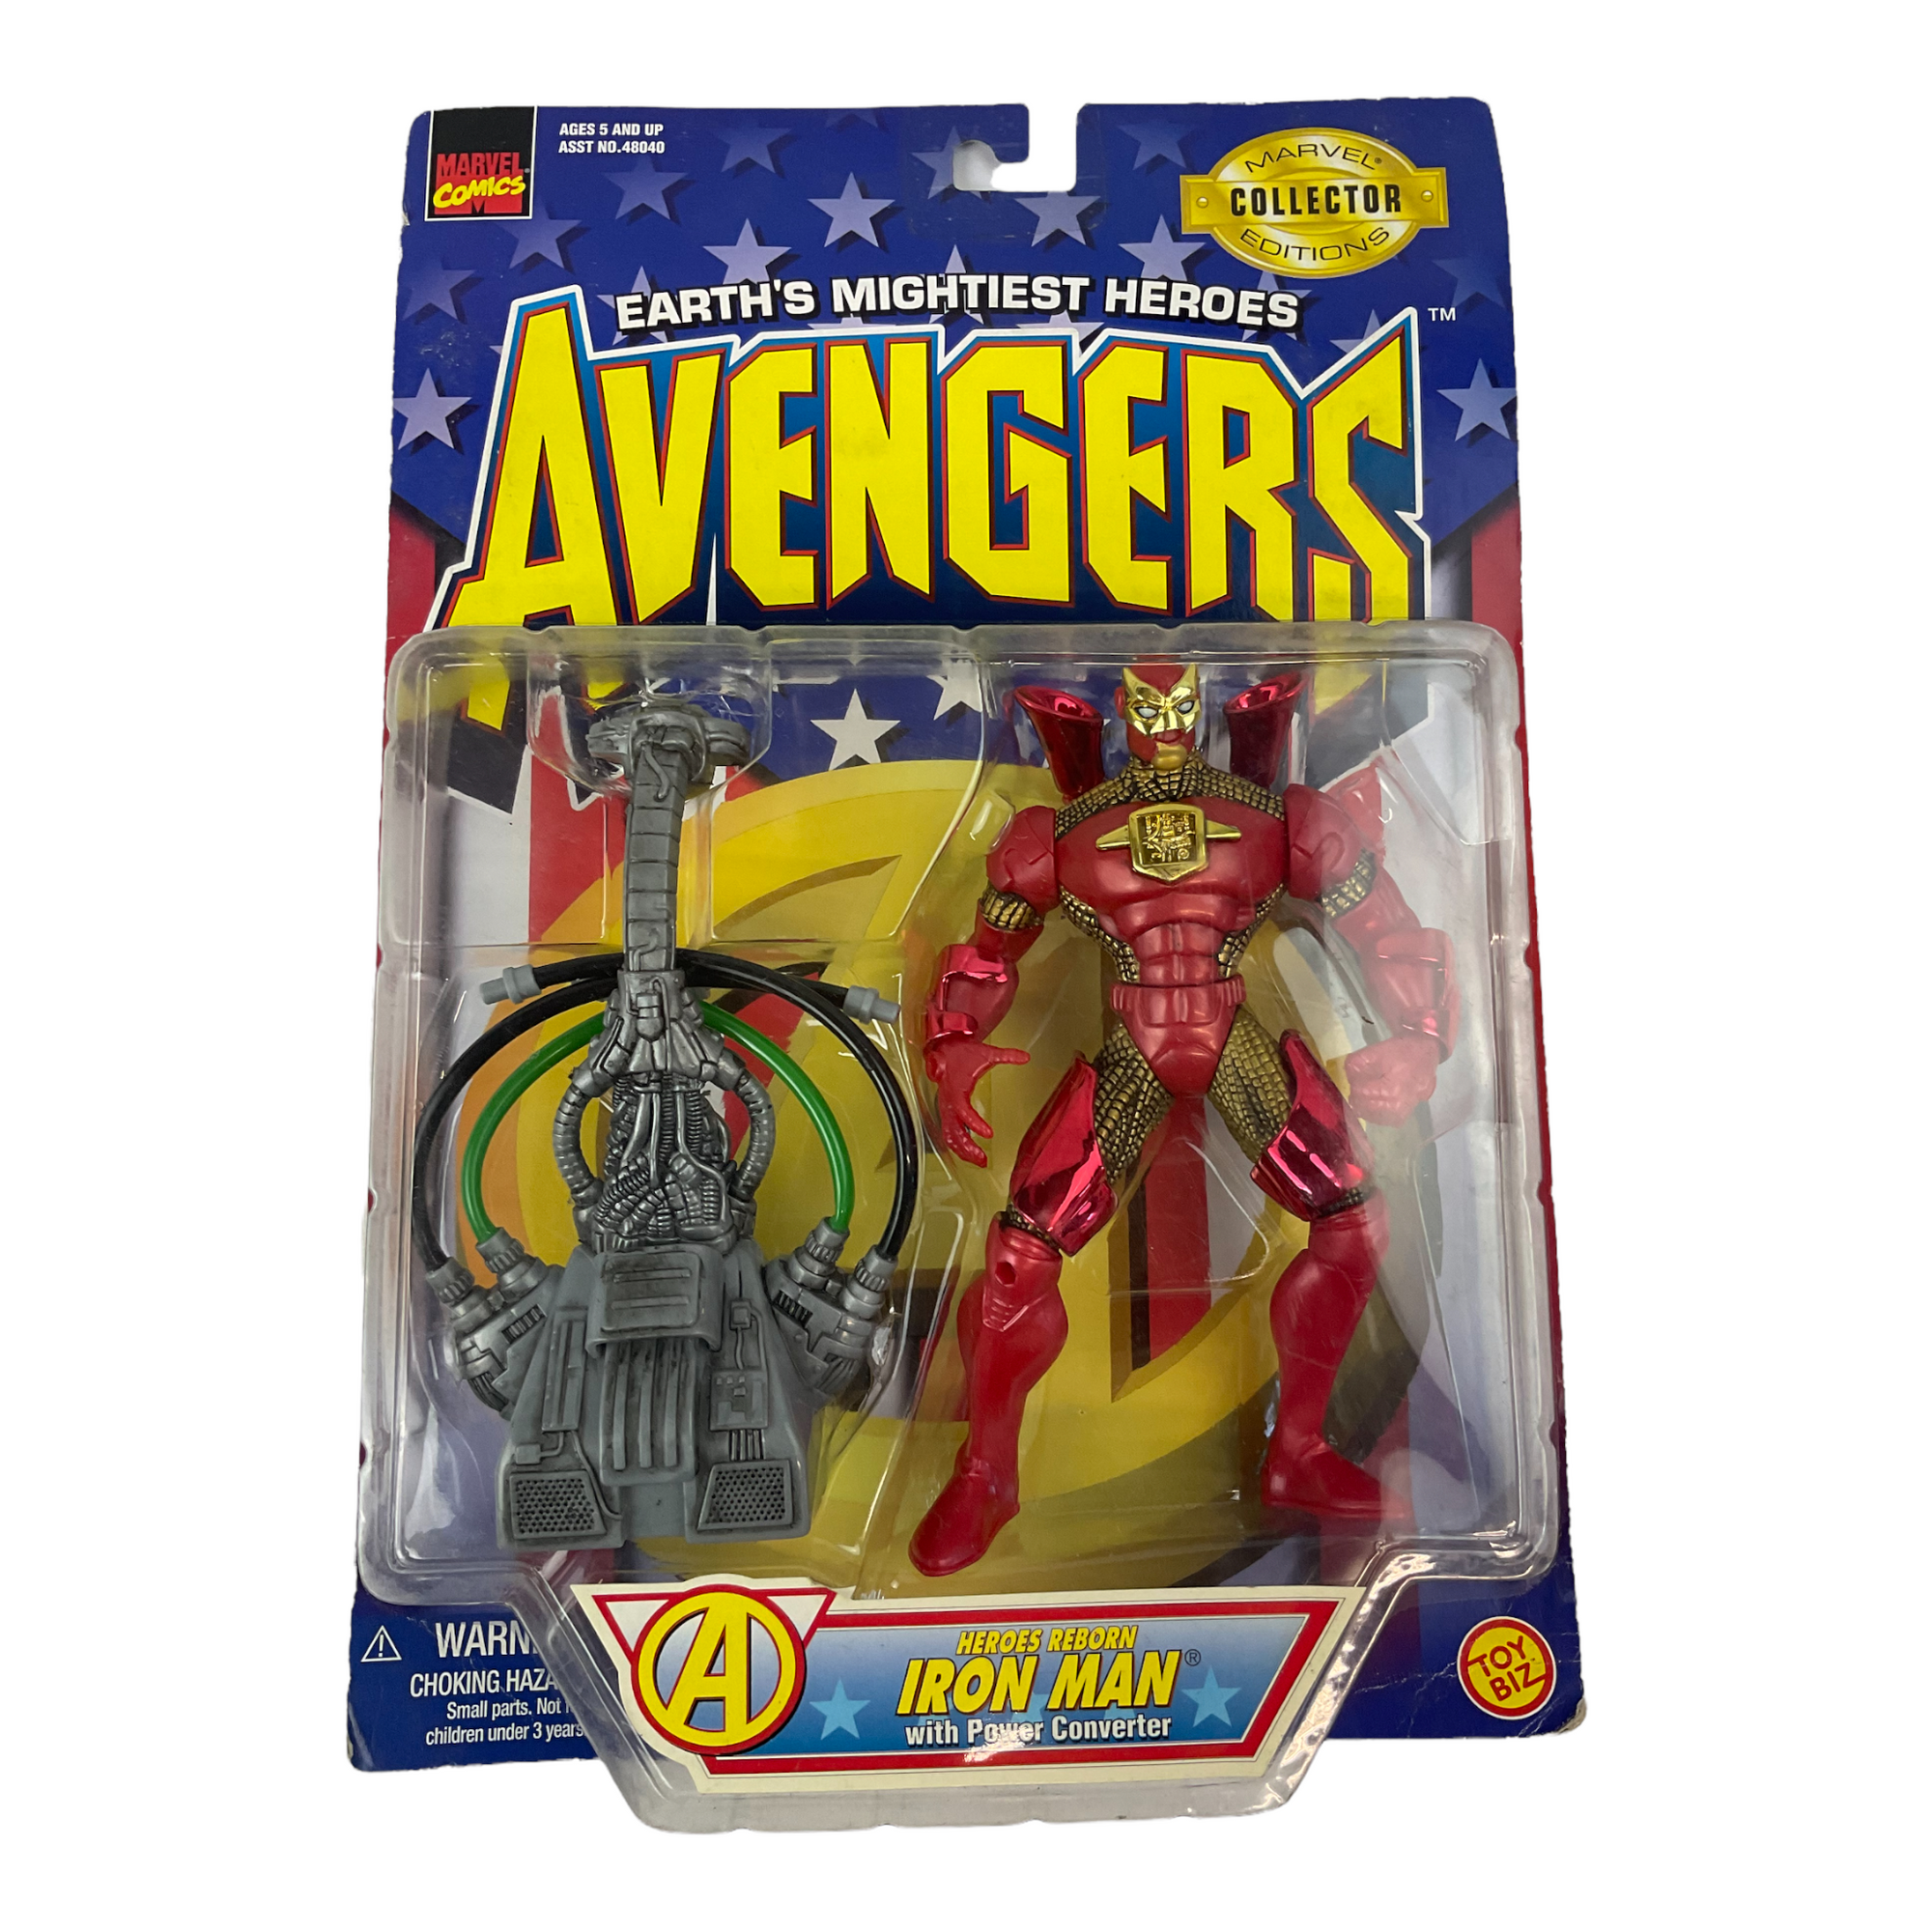 Avengers Iron Man Action Figure by Marvel